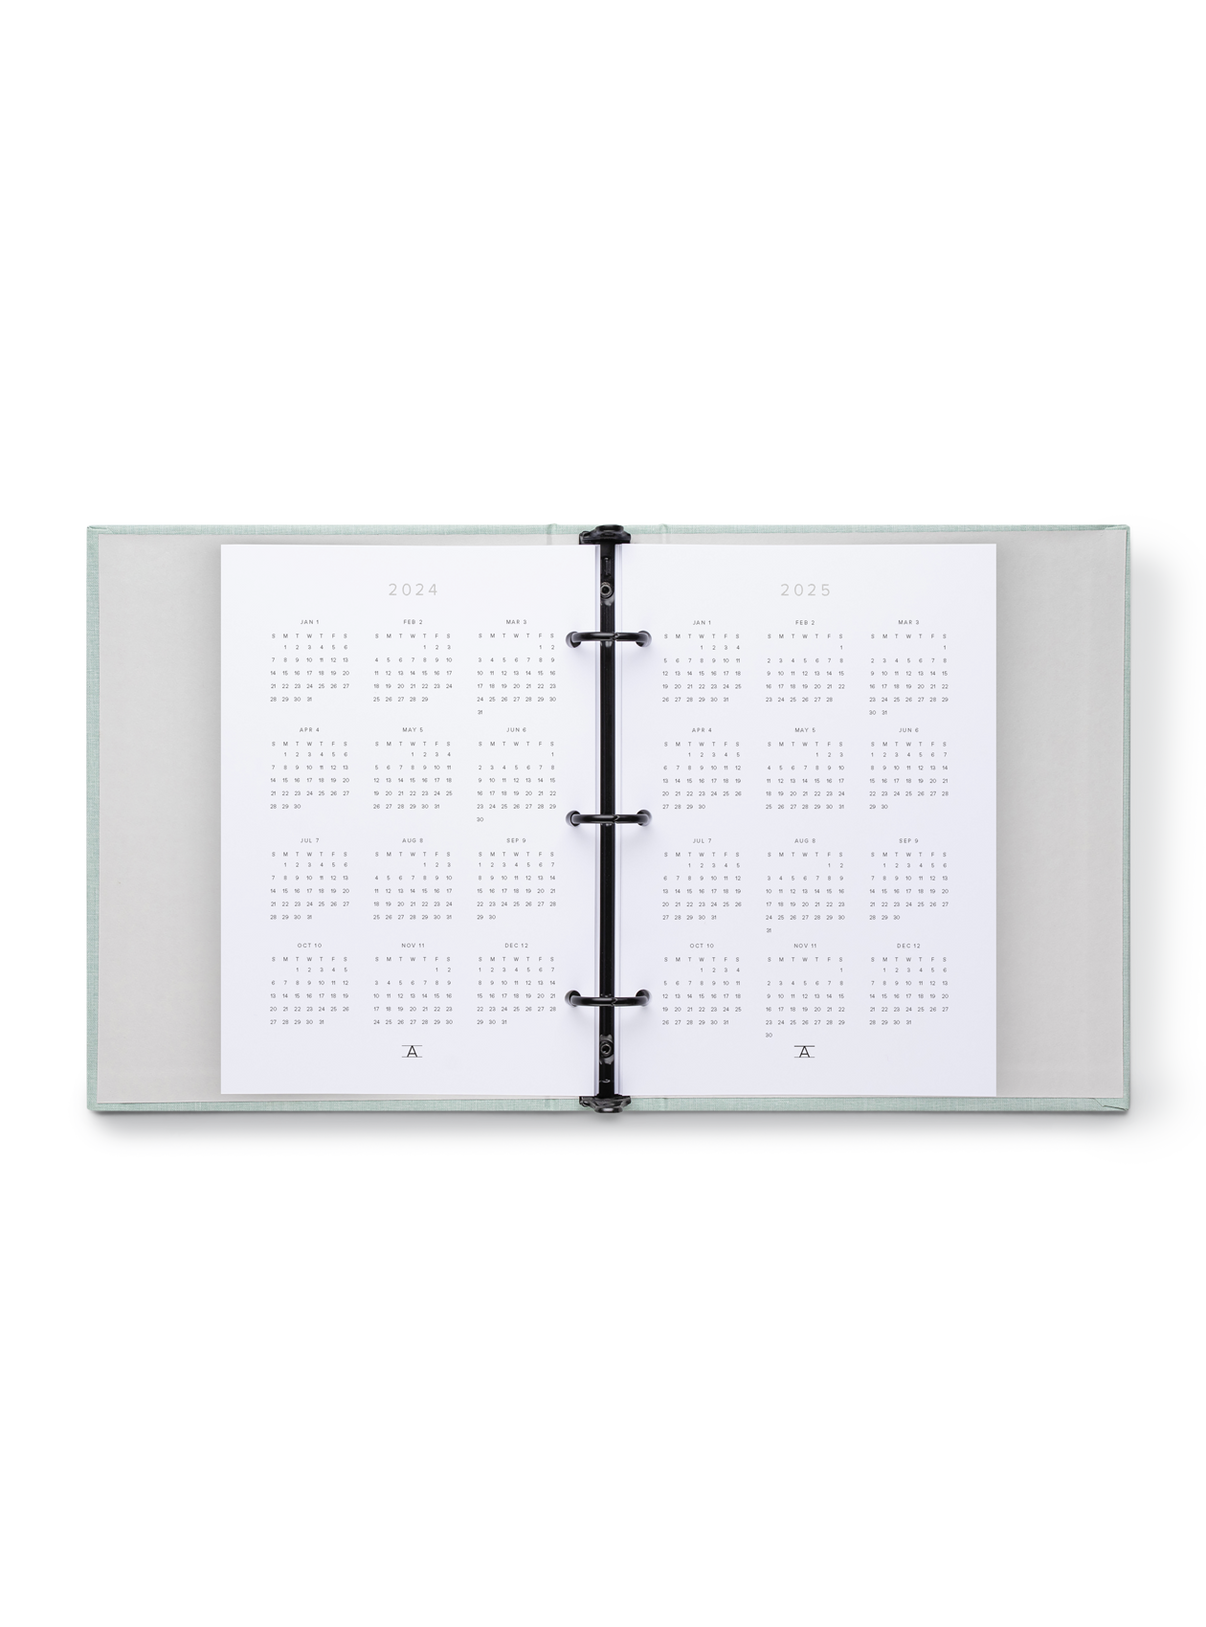 The Appointed 24-25 Compact Binder Planner in interior overview